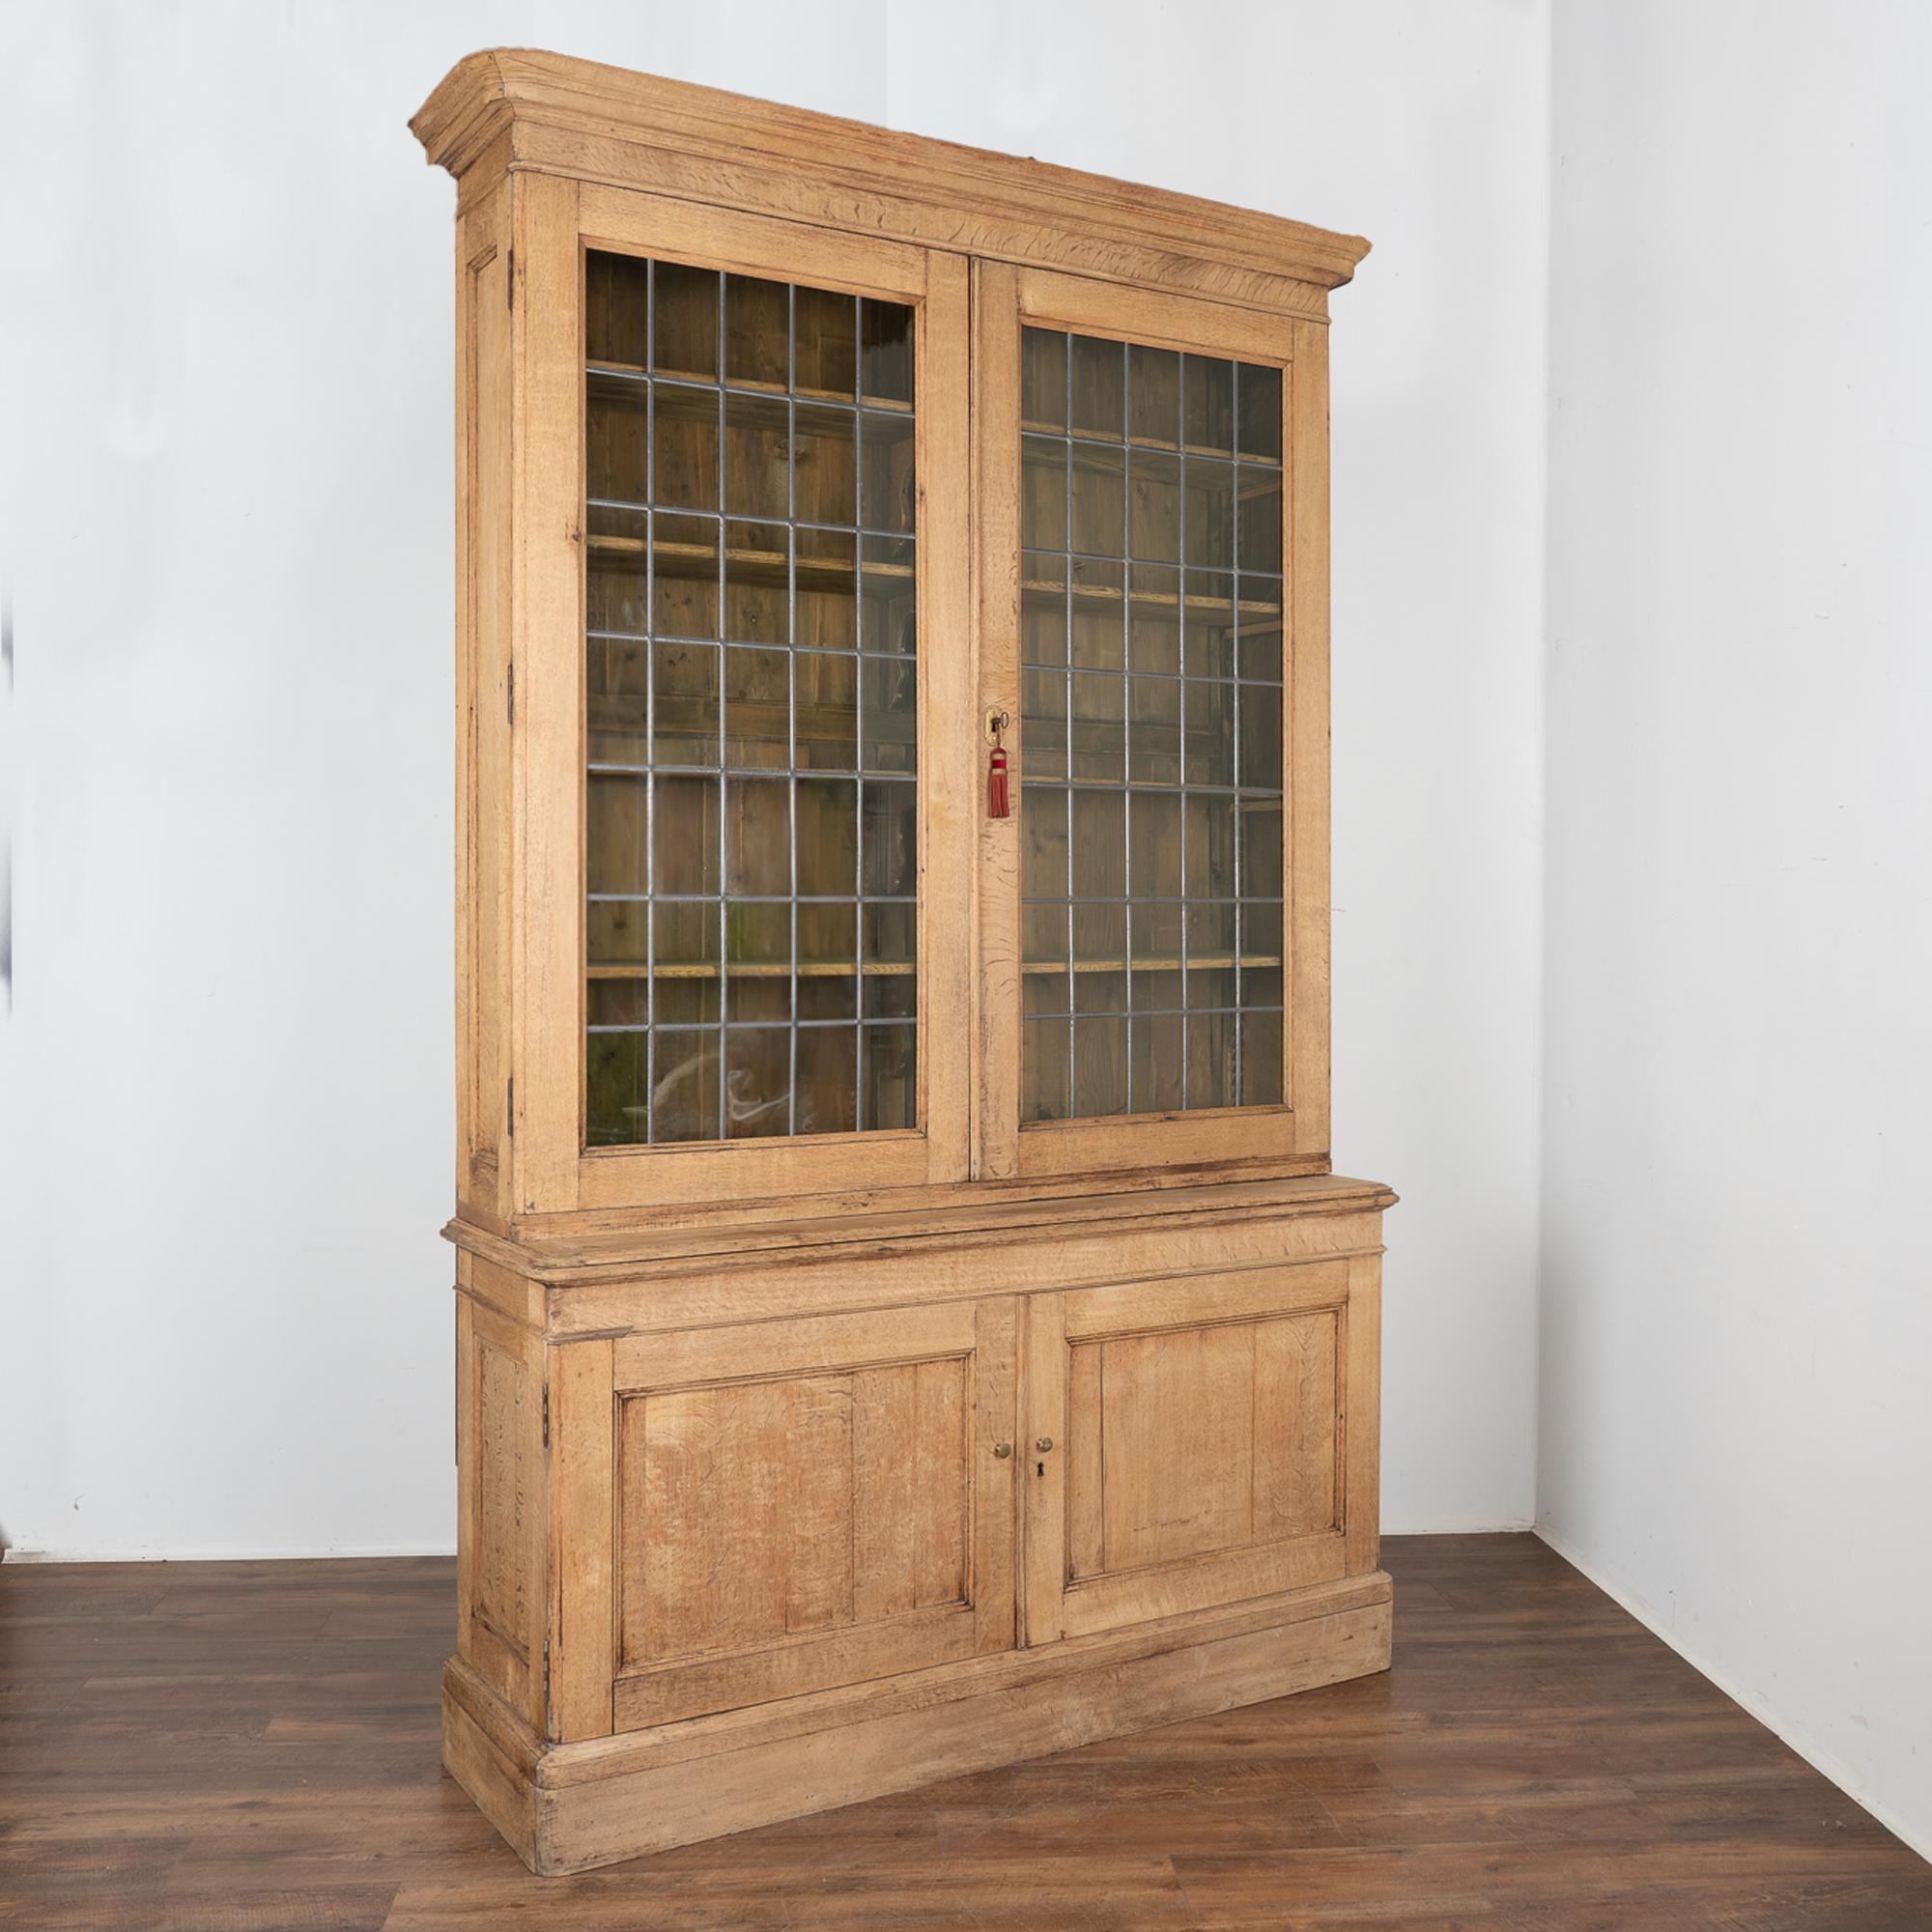 This large bleached oak bookcase is statuesque in size and detail. At 9.5' tall, the lead panes of the large glass doors add to its strong visual presence.
Originally the 